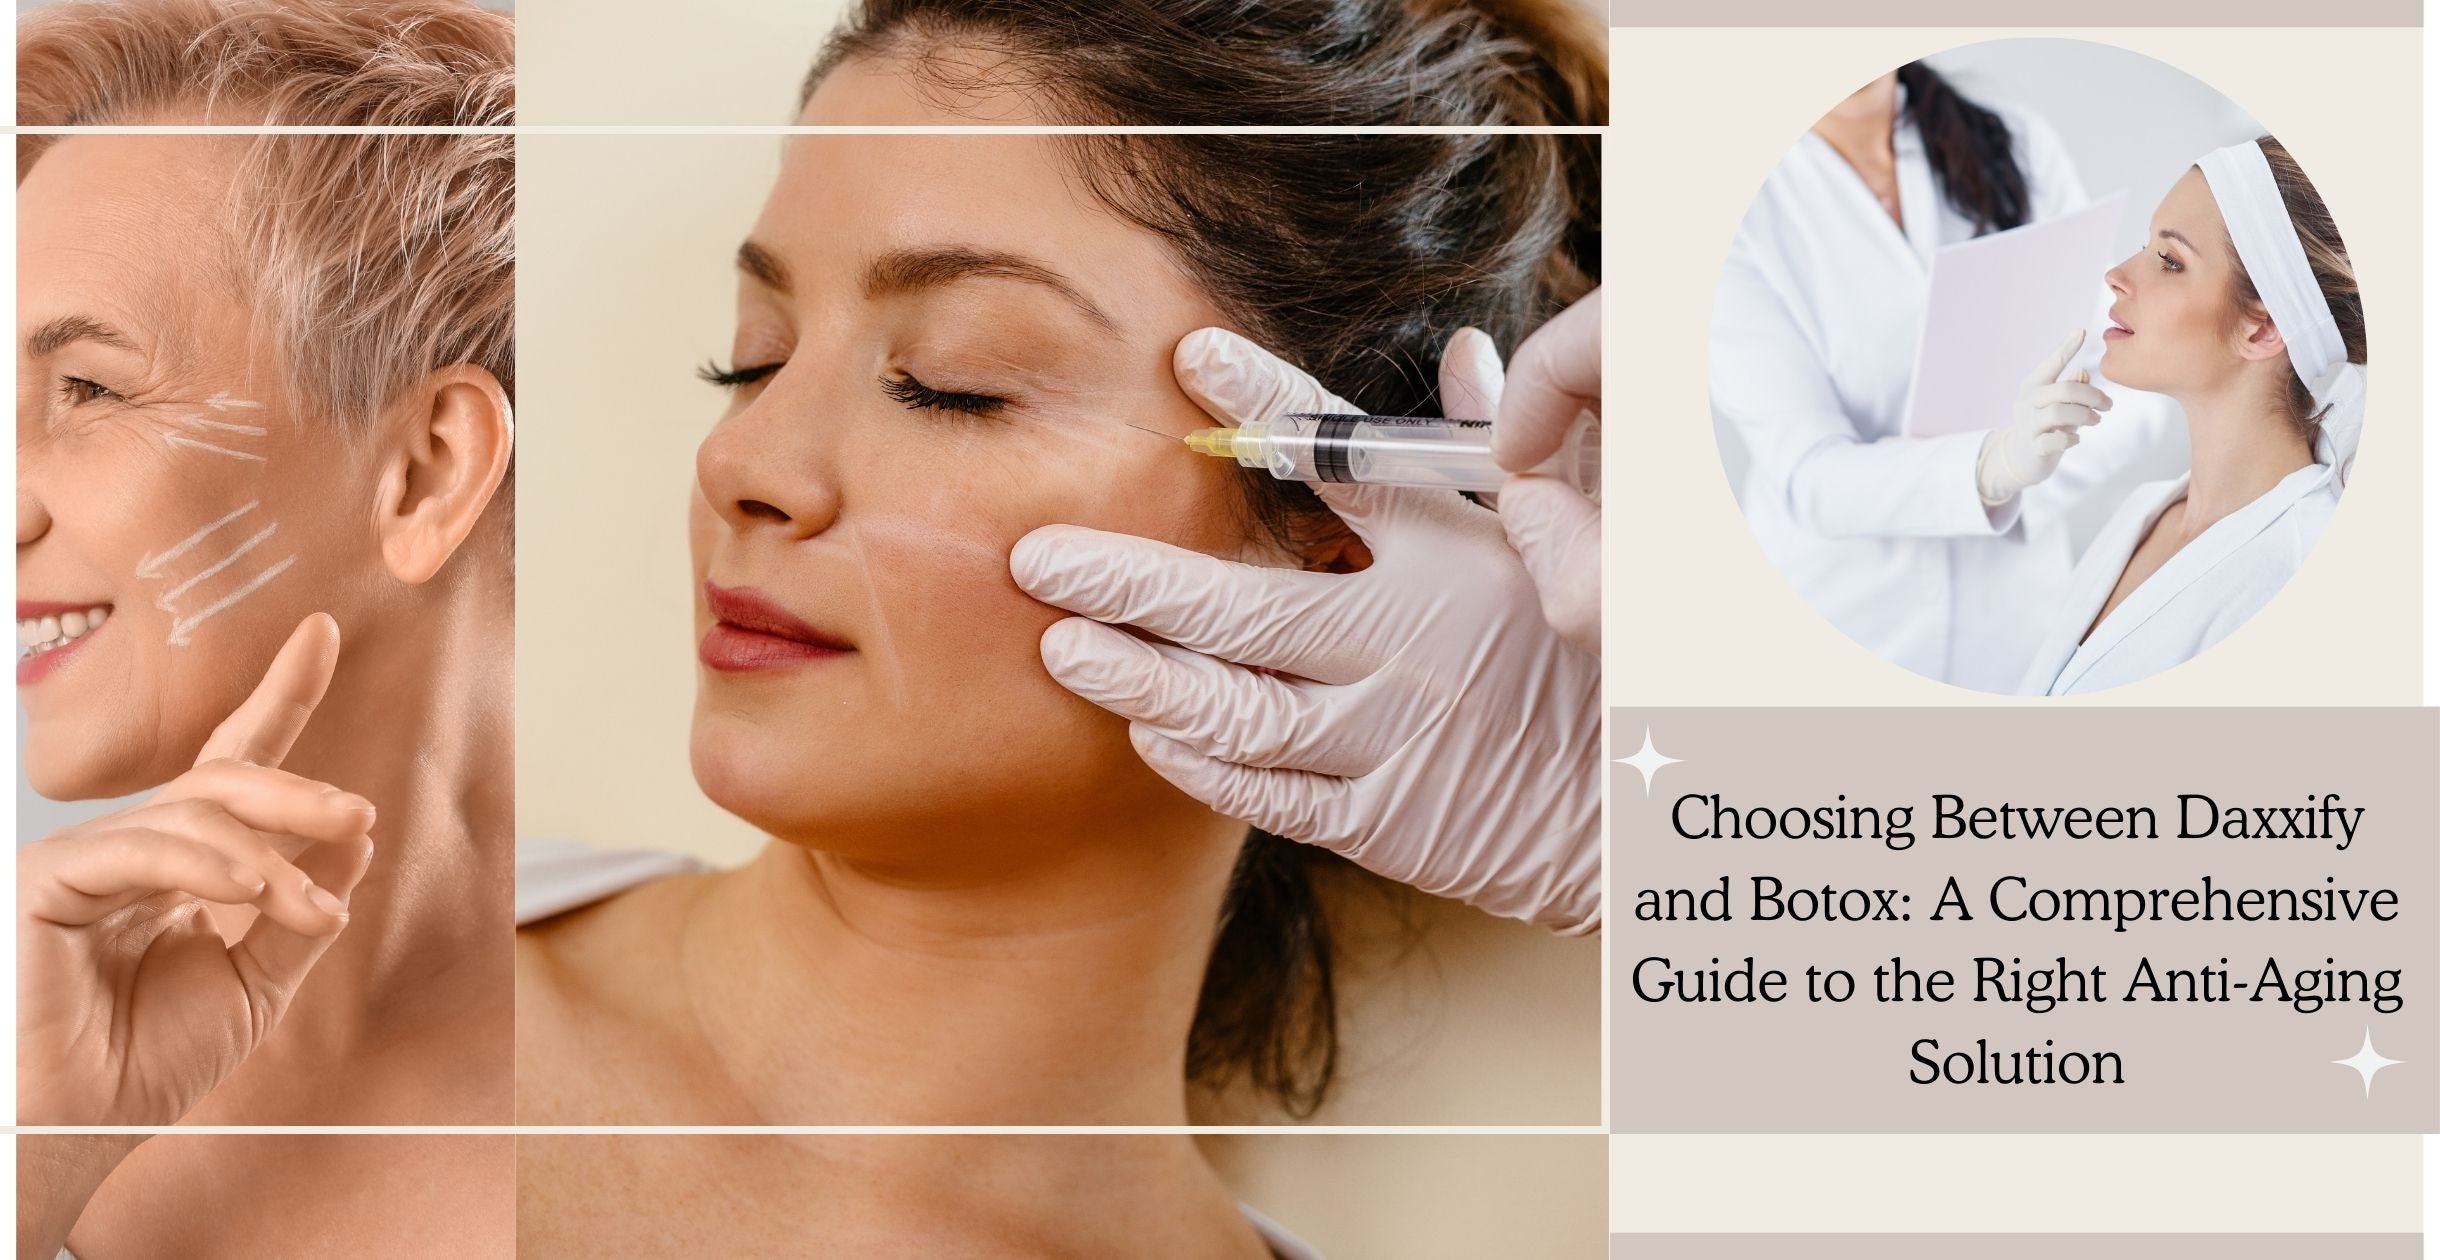 Choosing Between Daxxify and Botox: A Comprehensive Guide to the Right Anti-Aging Solution